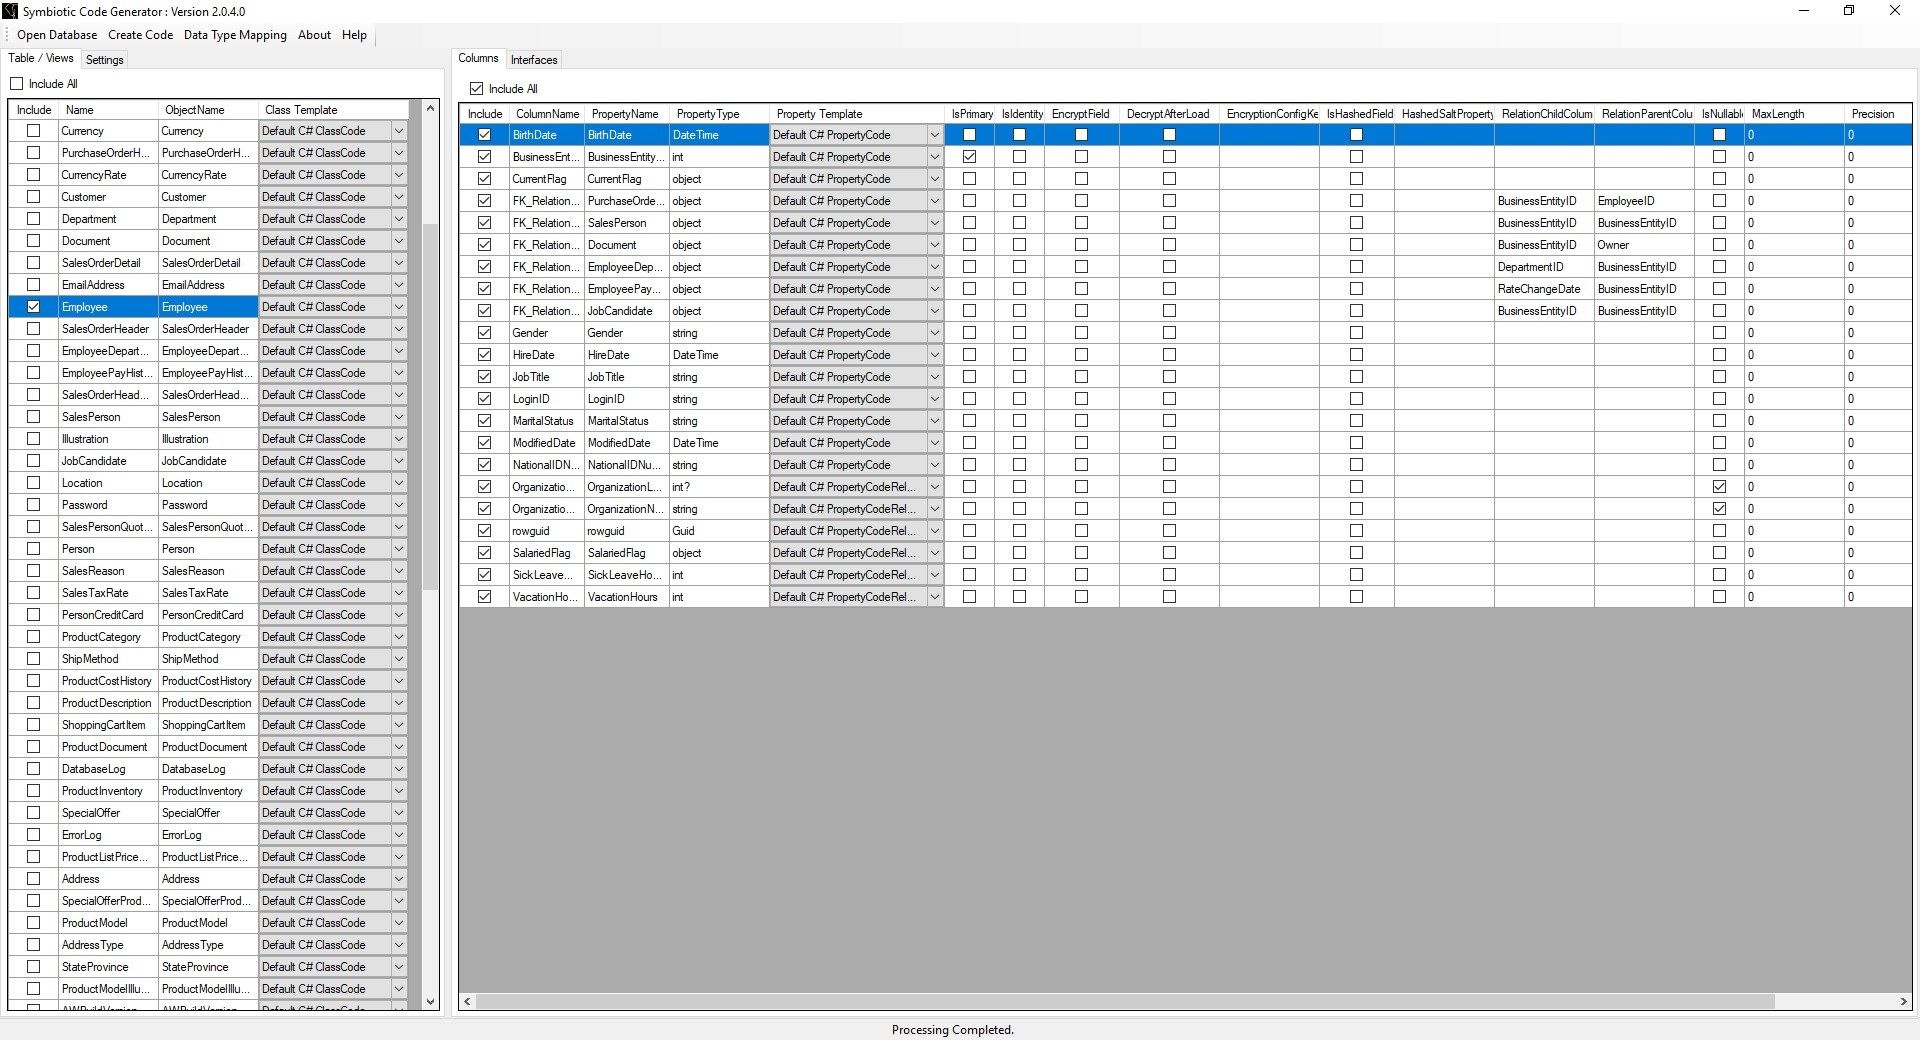 This shows the too with AdventureWorks2012 database load. The left side is the tables/views and on the right the table/view details with the columns.